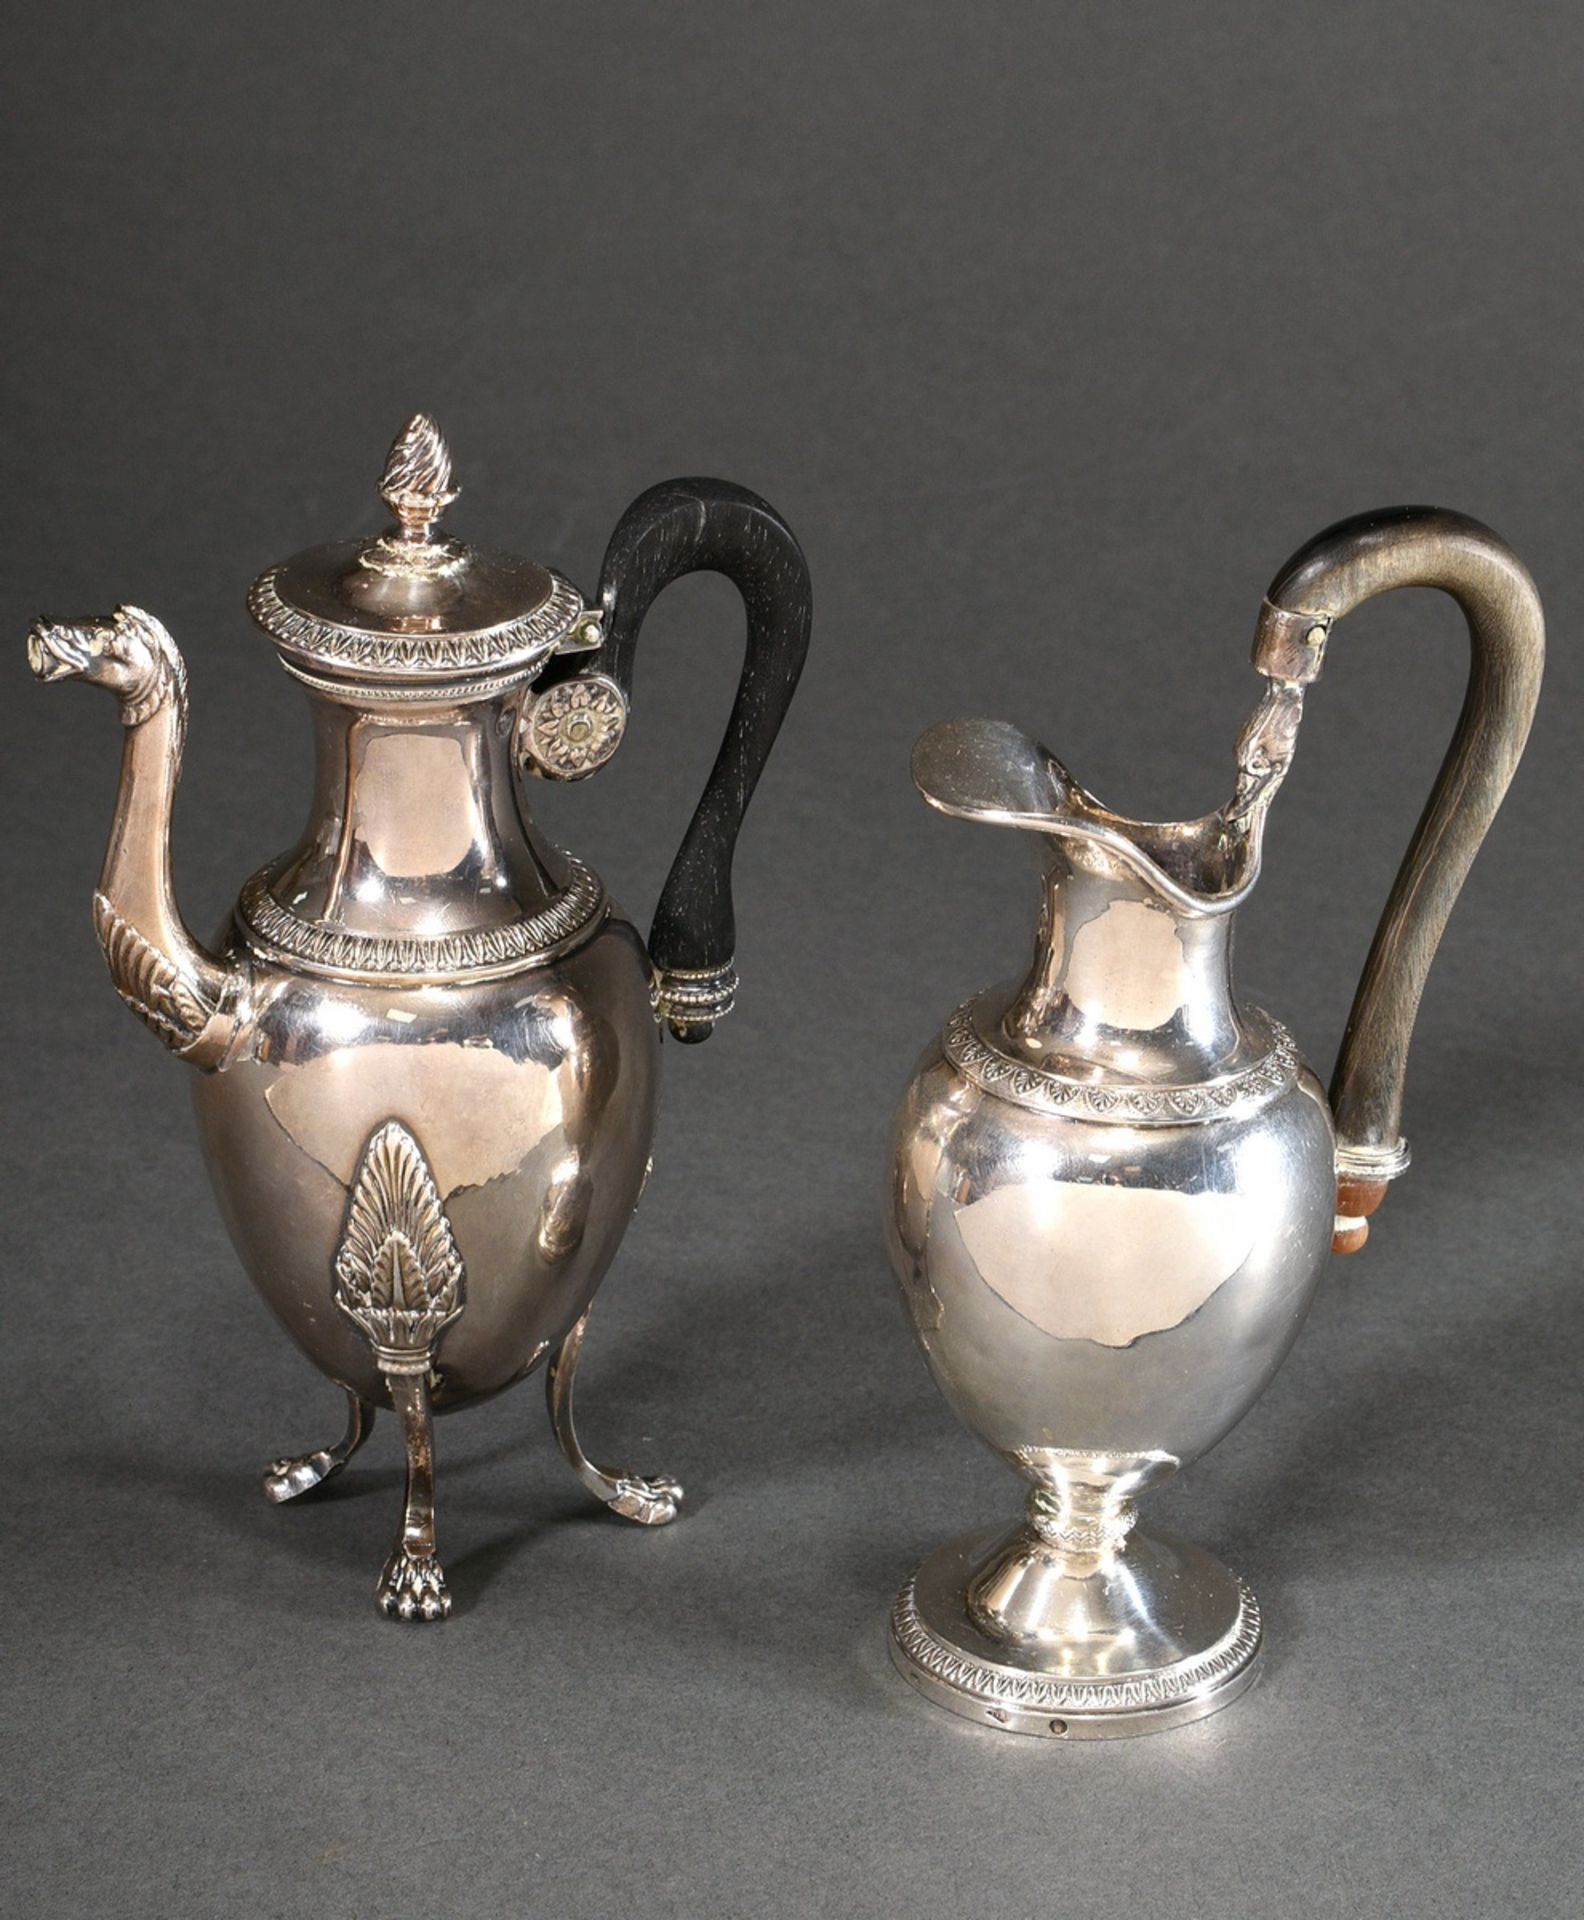 2 Small French jugs with classical ornamental and foliate frieze and wood and horn handles, 1x with